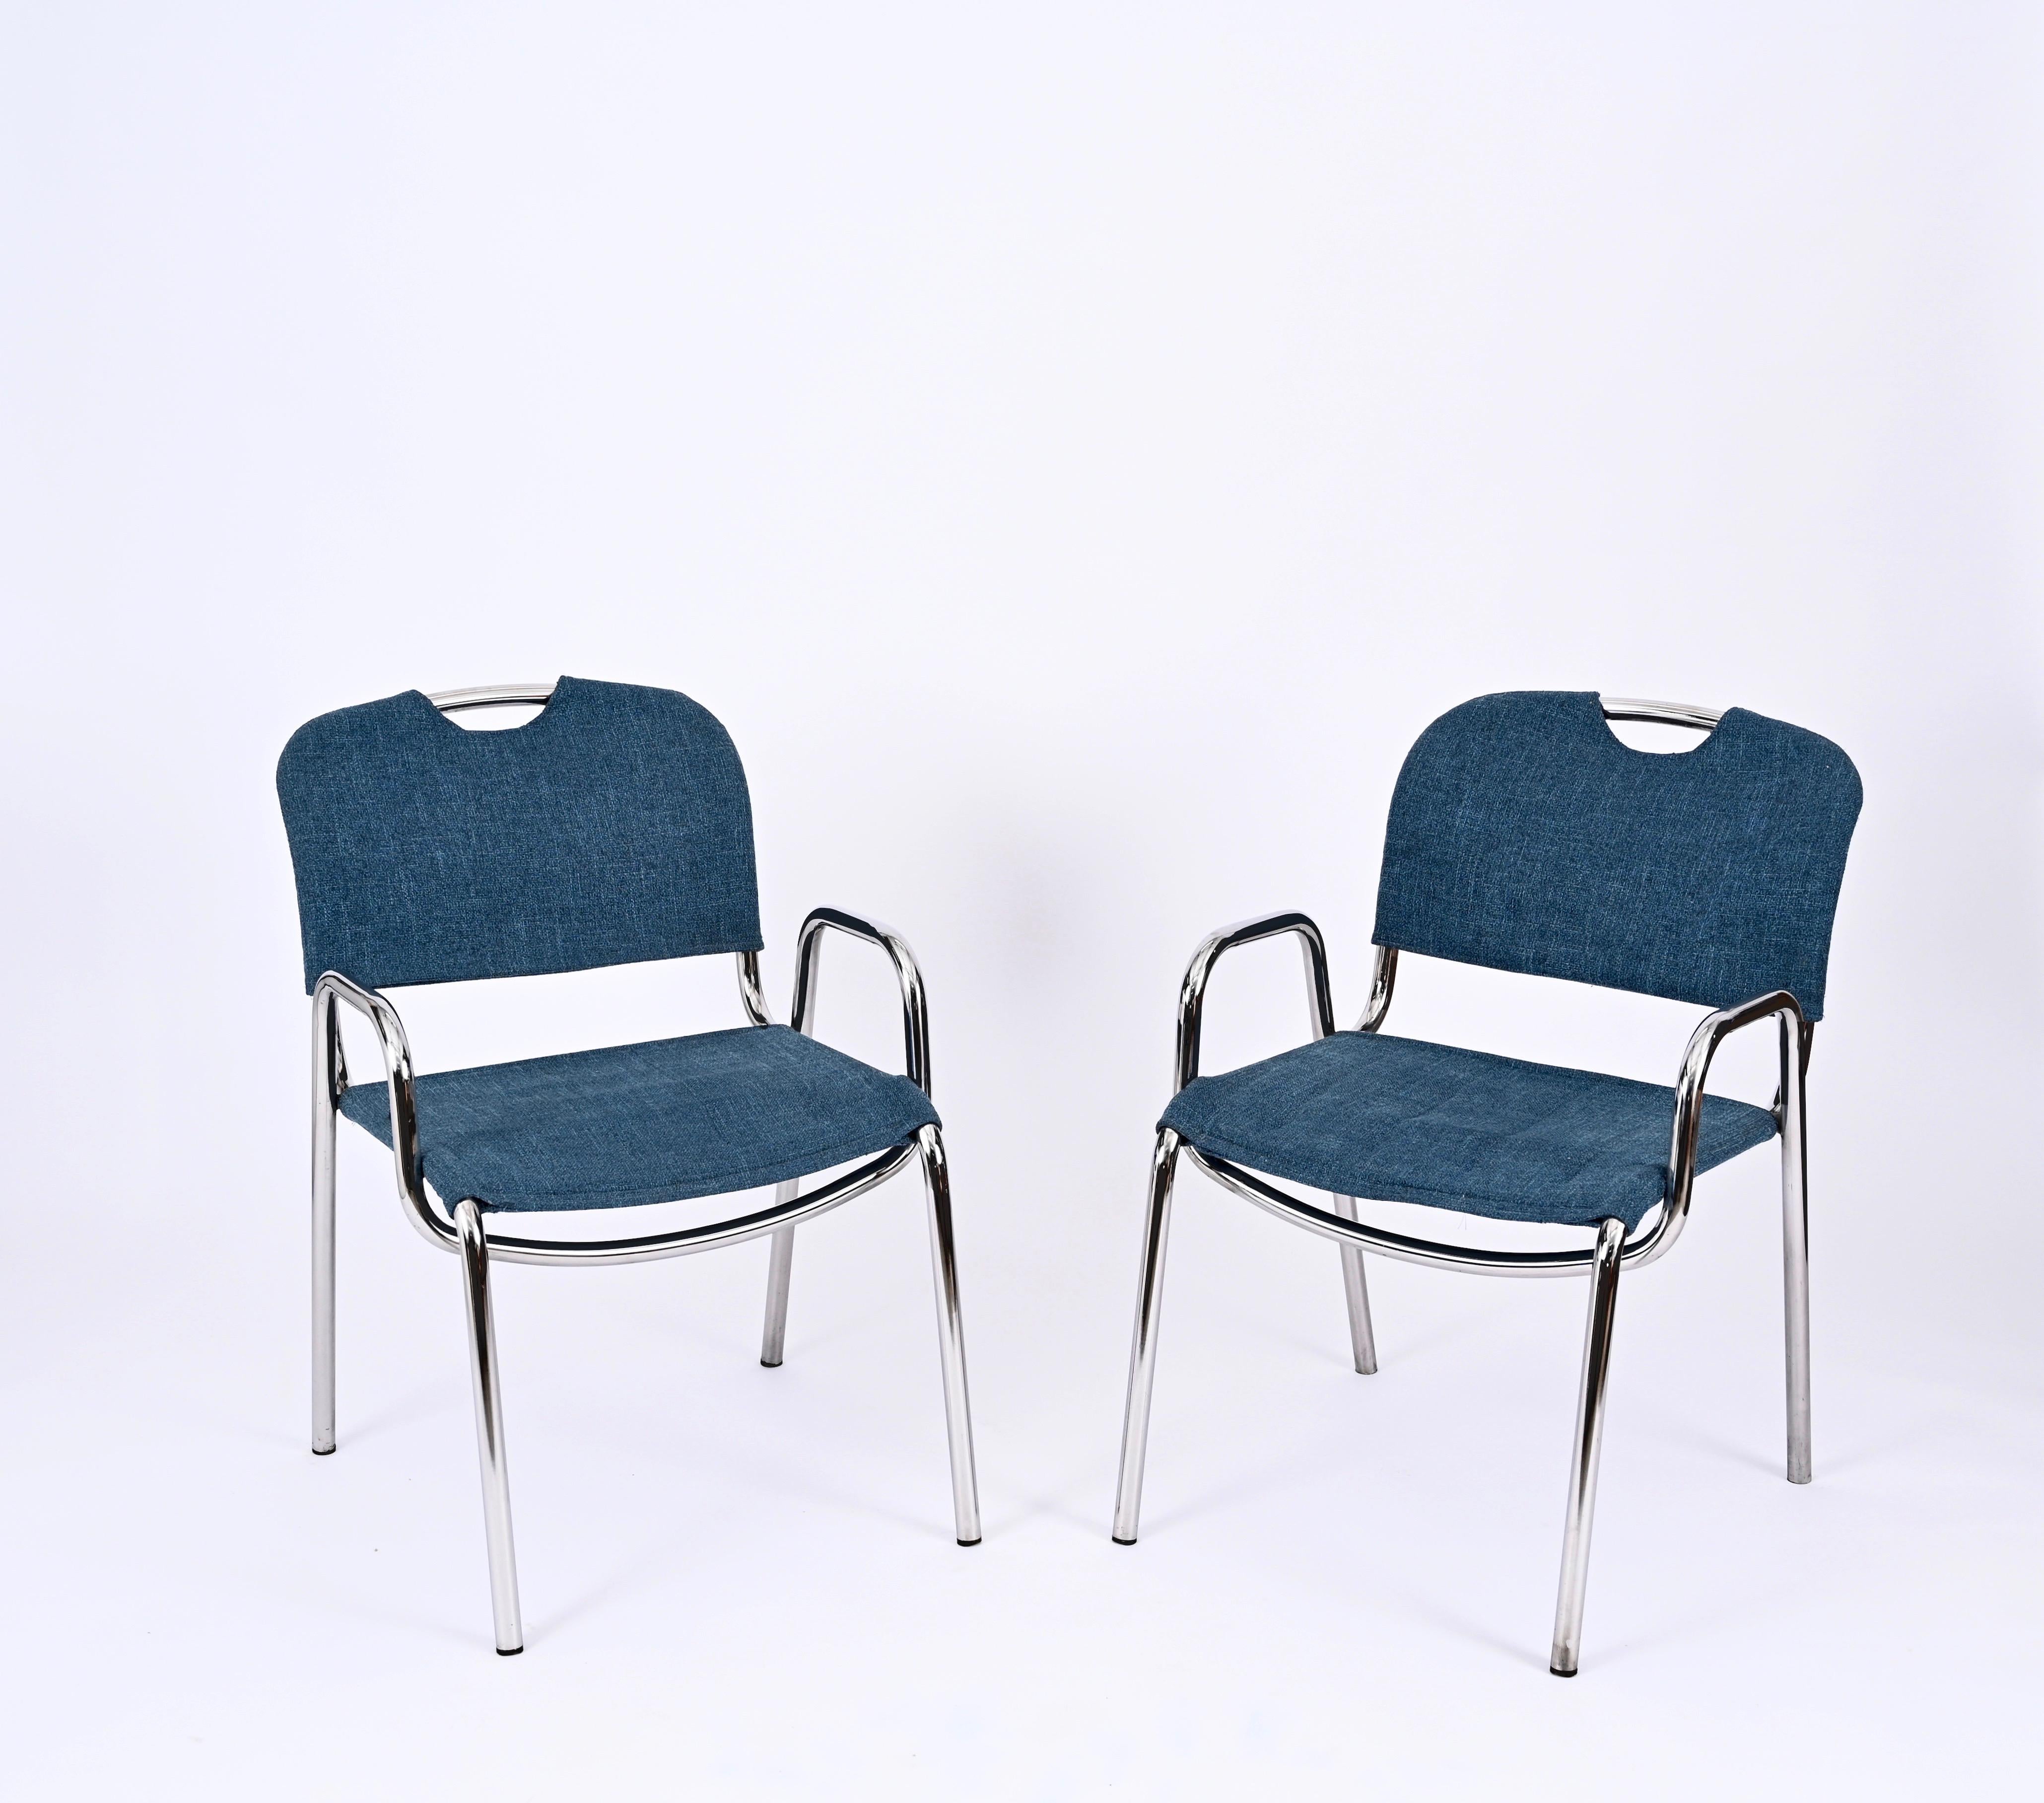 Lovely pair of stackable Castiglietta Chairs in blue fabric. These iconic chairs were designed by Achille Castglioni and produced by Zanotta in Italy in the 1960s, the chairs are signed on the bottom of the legs. 

The Castiglietta chairs are made